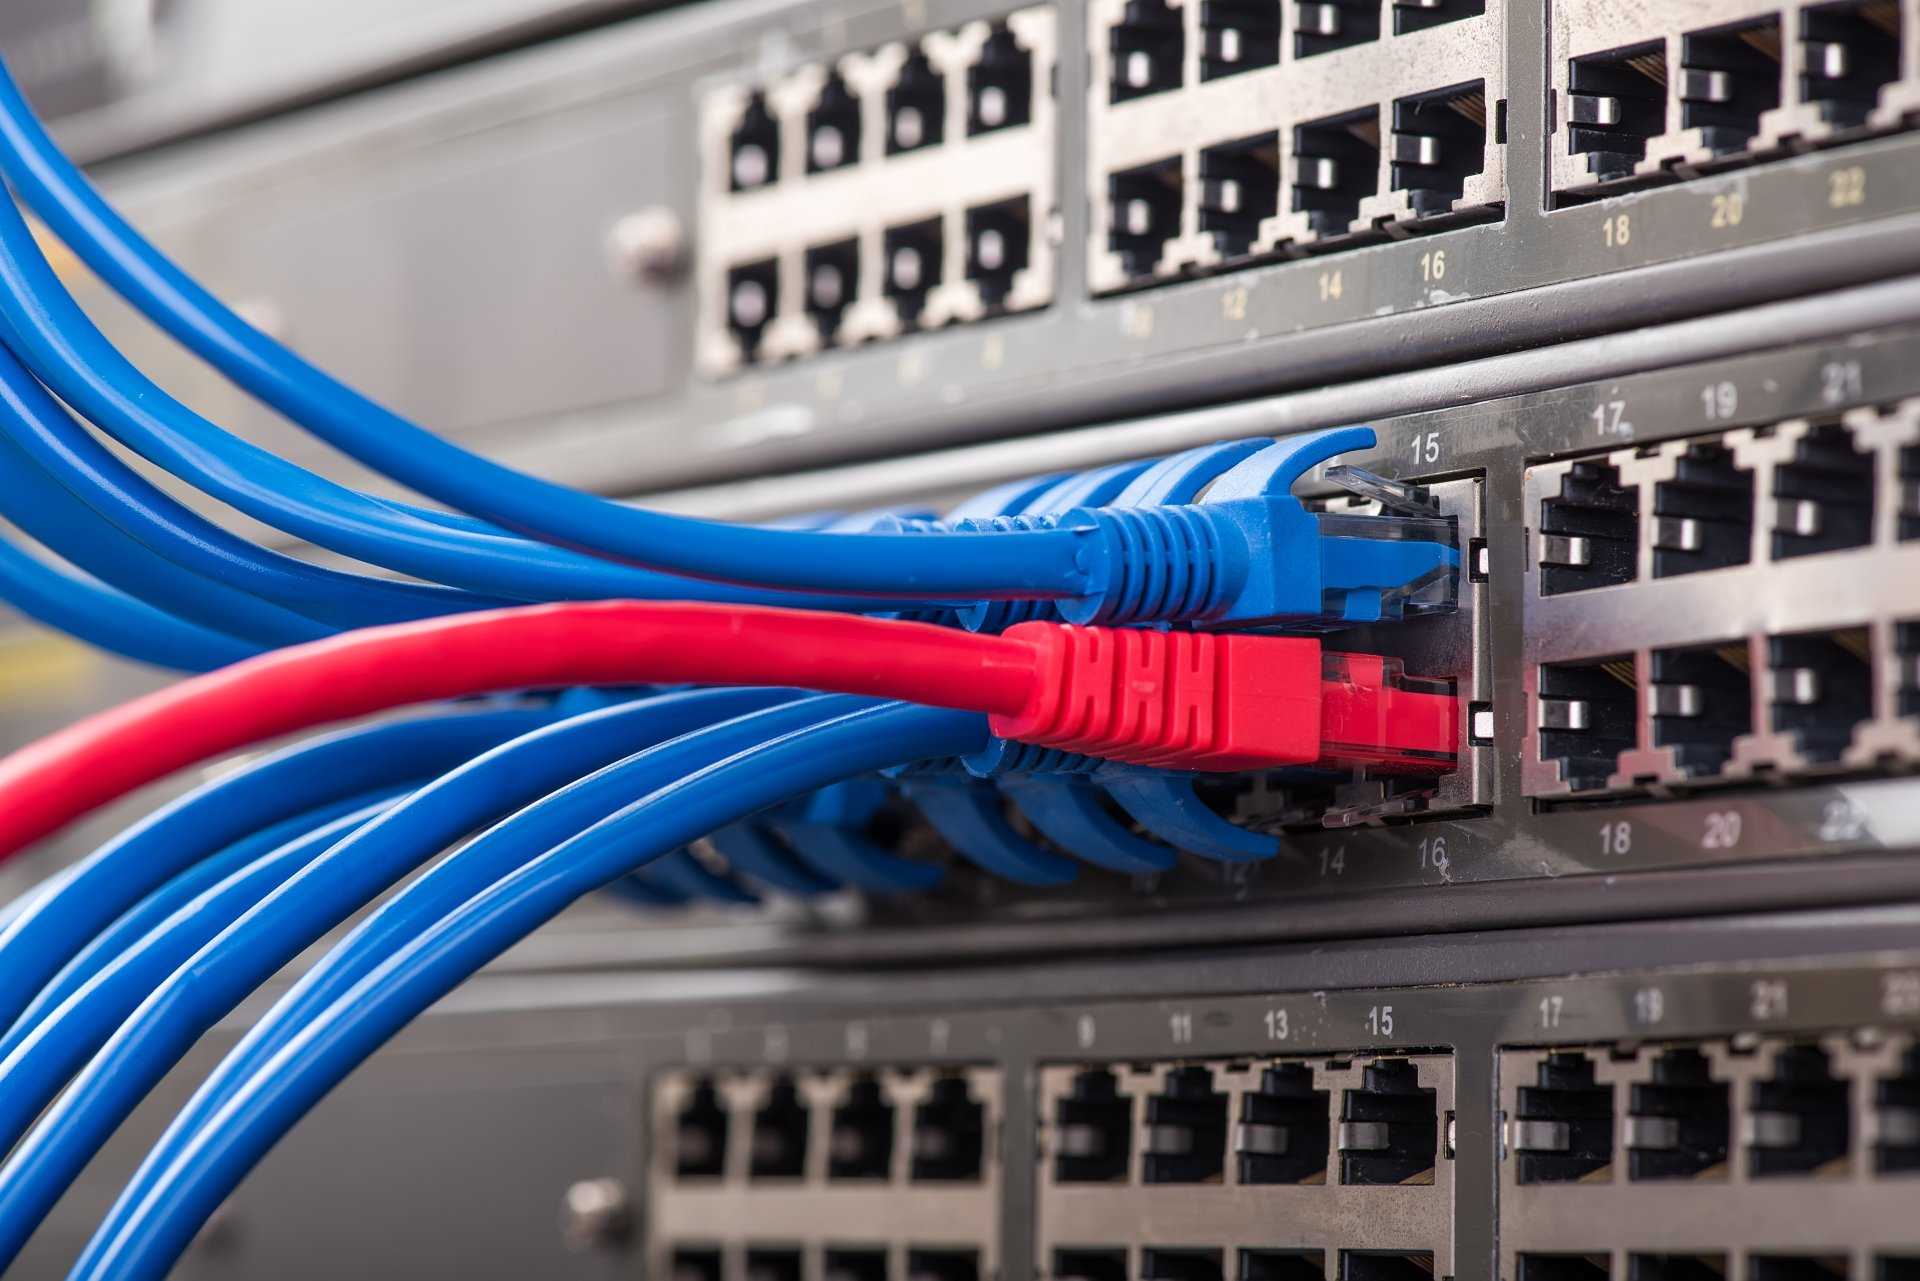 Red and blue lan cables — Networking & Wi-Fi in Forster NSW